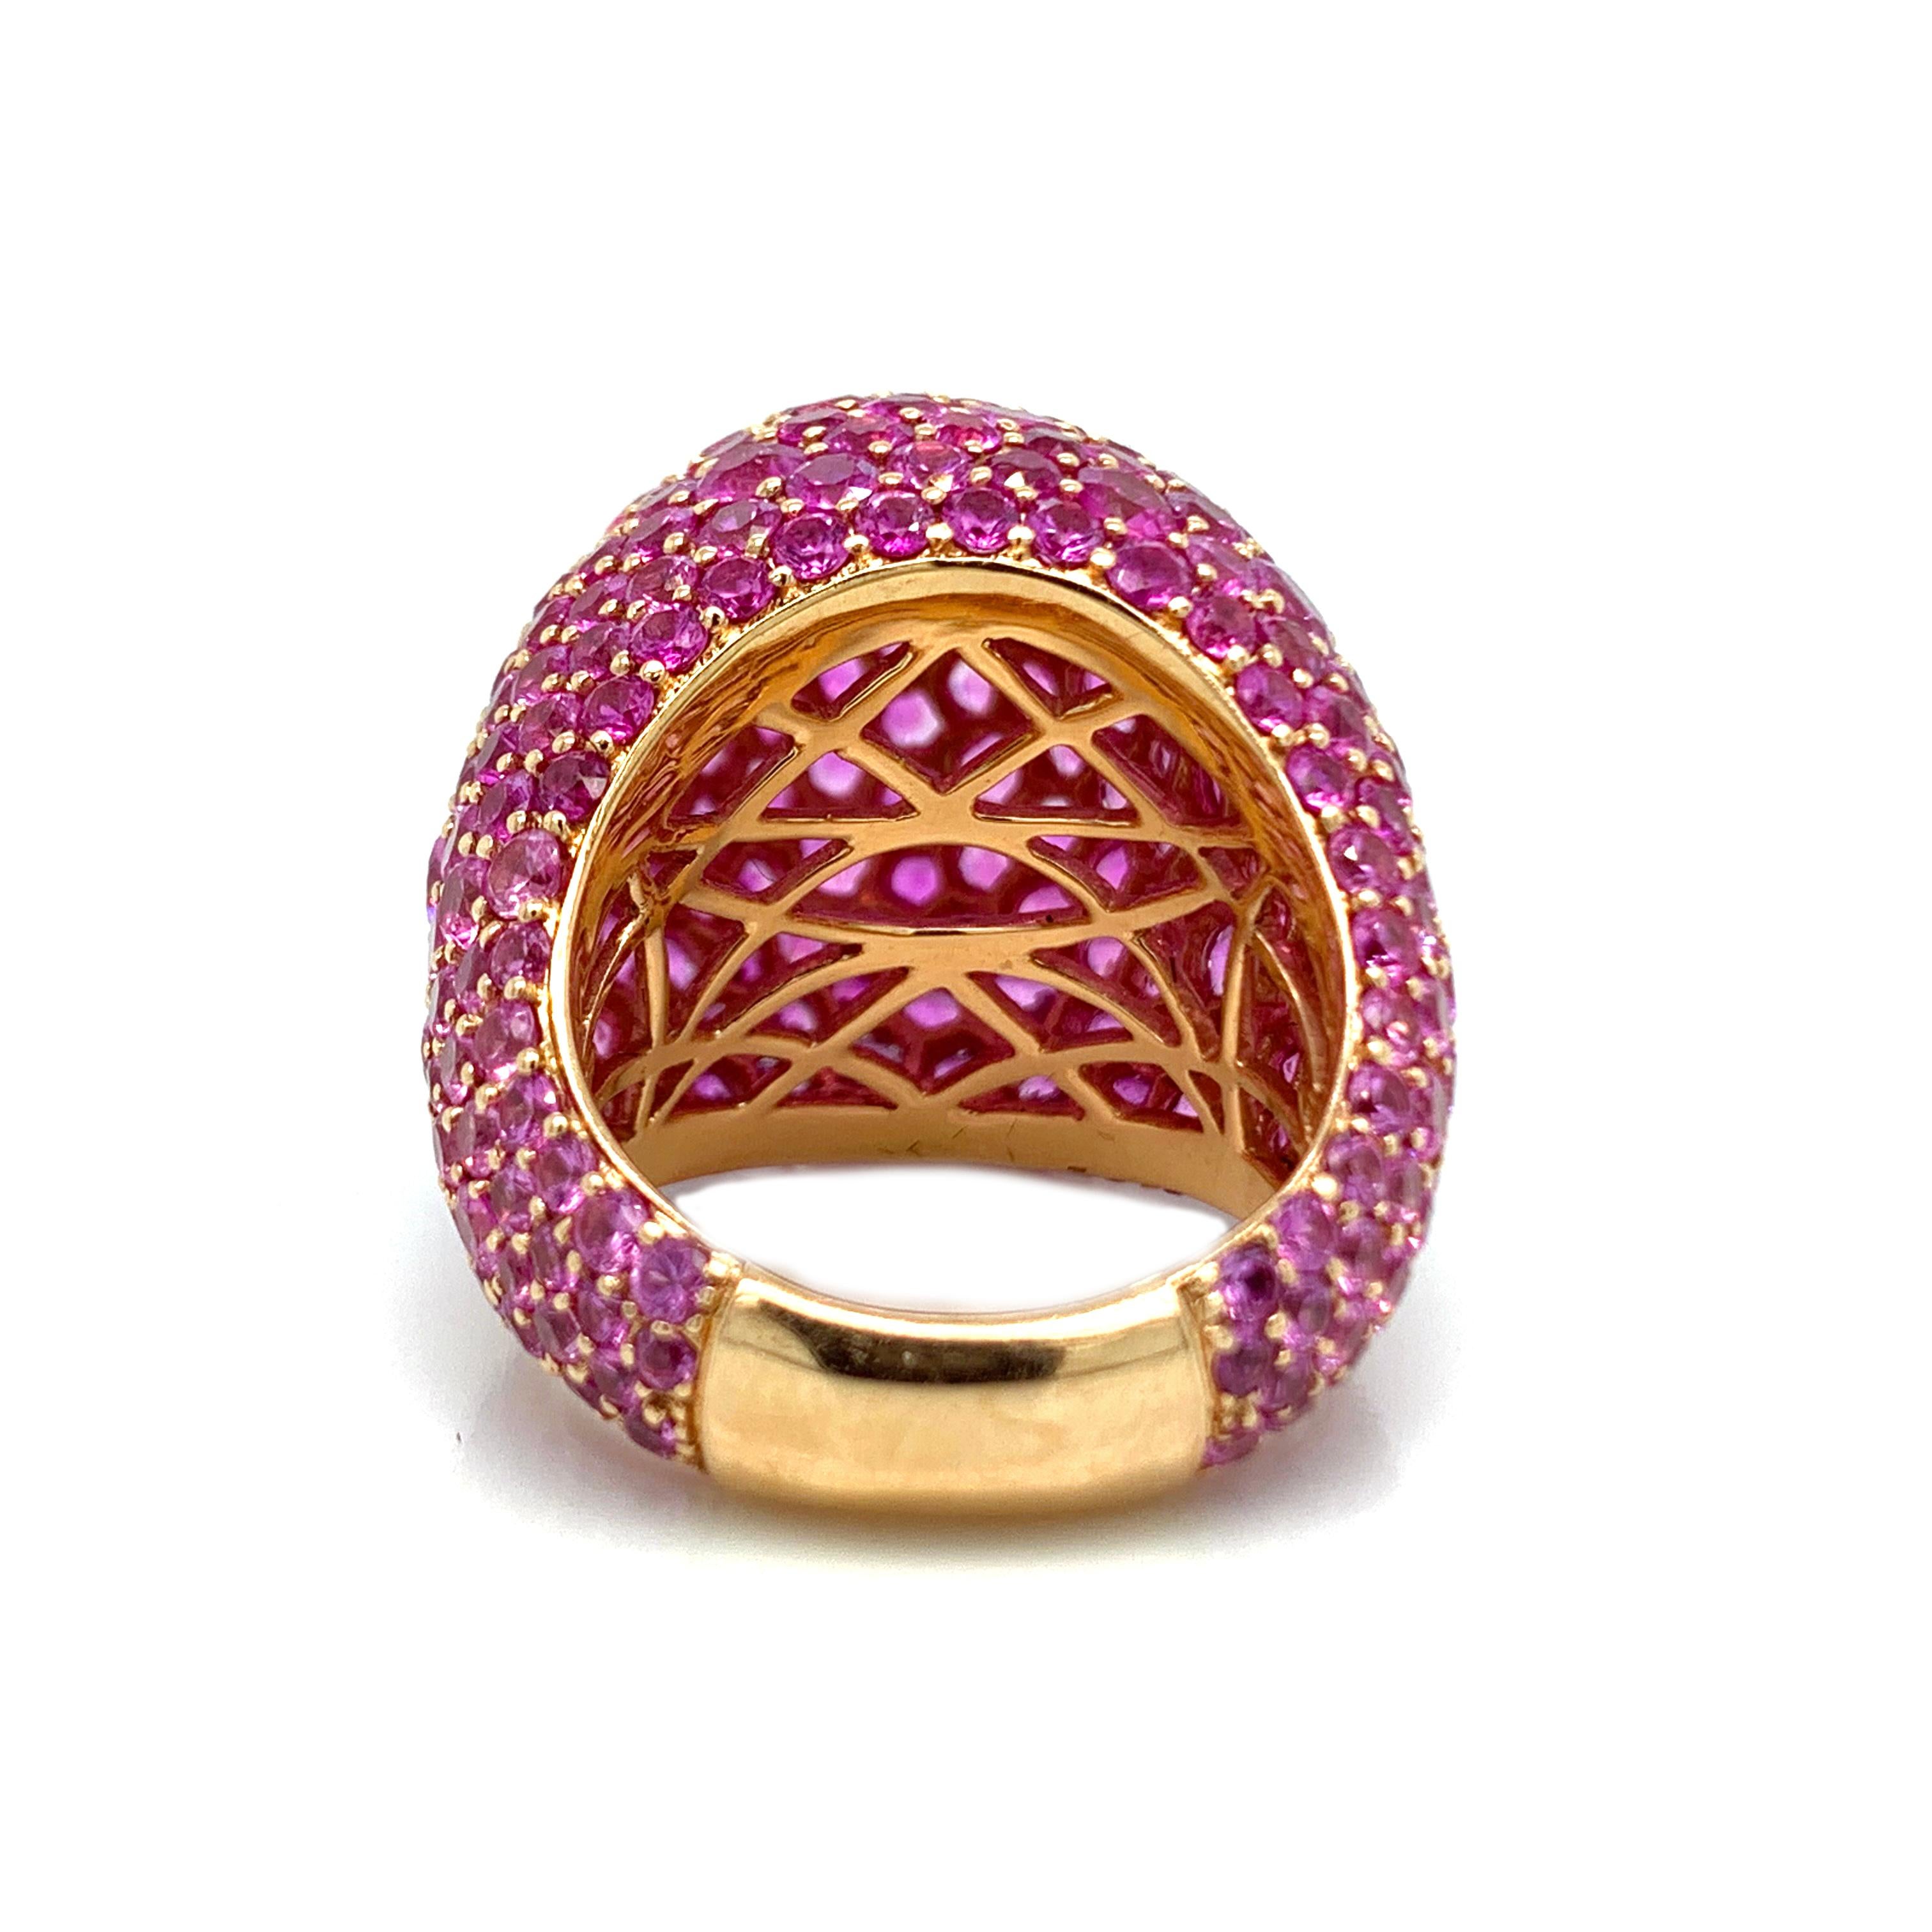 A, beautifully crafted pink sapphire dome ring. In an 18kt yellow gold polished finish this beautiful dome ring weigh 19.7 grams and is a US ring size 6.5. Covered, in 17.80cts of beautiful round pink saphires sapphires. The ring is also stamped